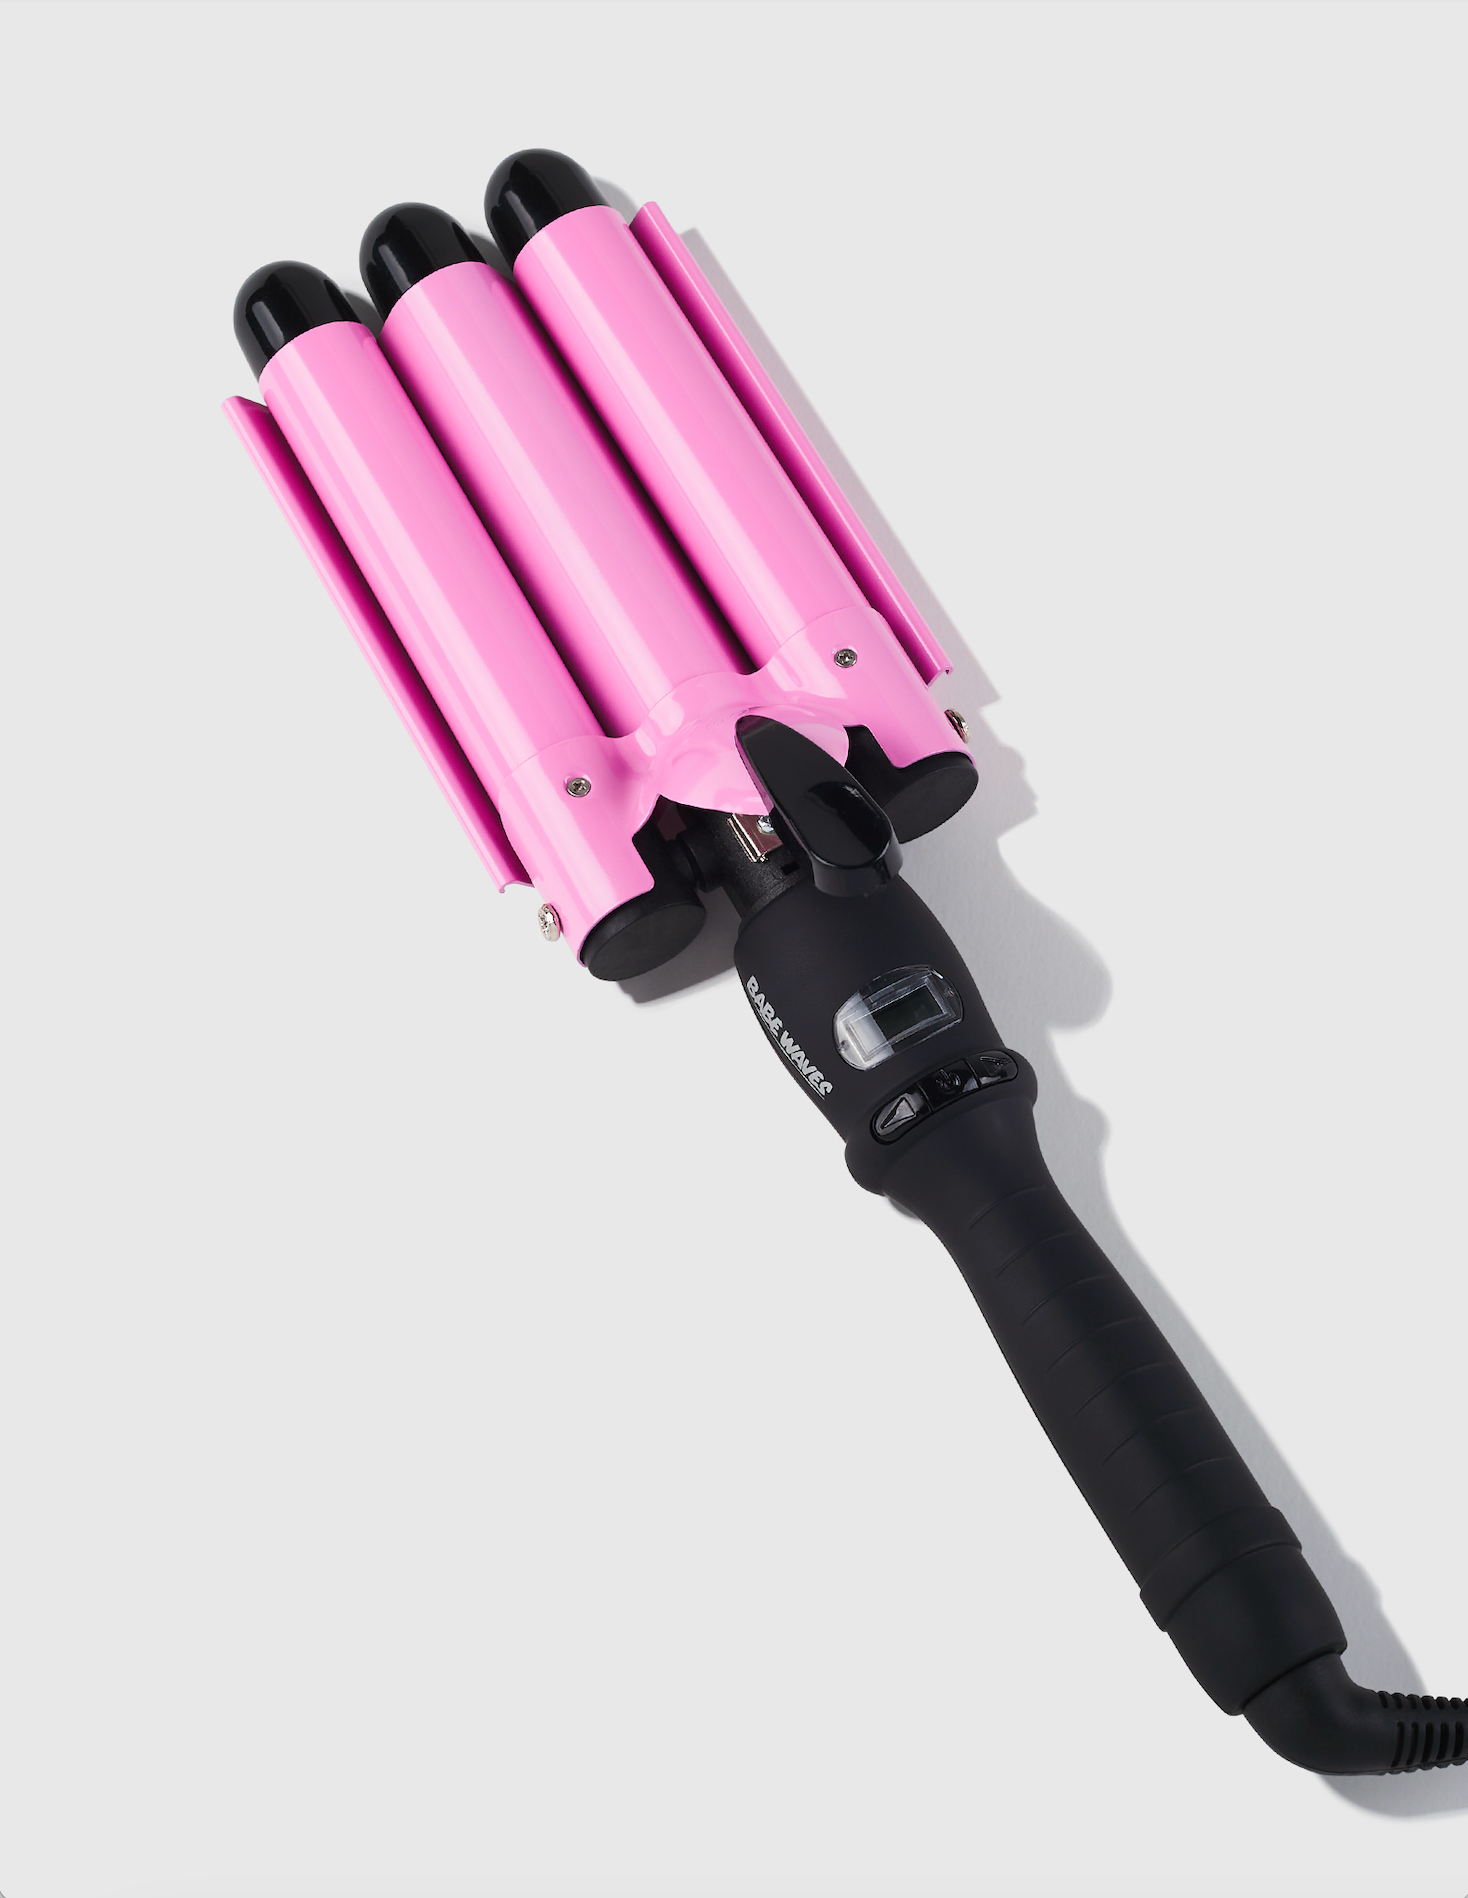 Waves　Waves　Mermaid　Babe　Iron　Get　Curling　with　3-Barrel